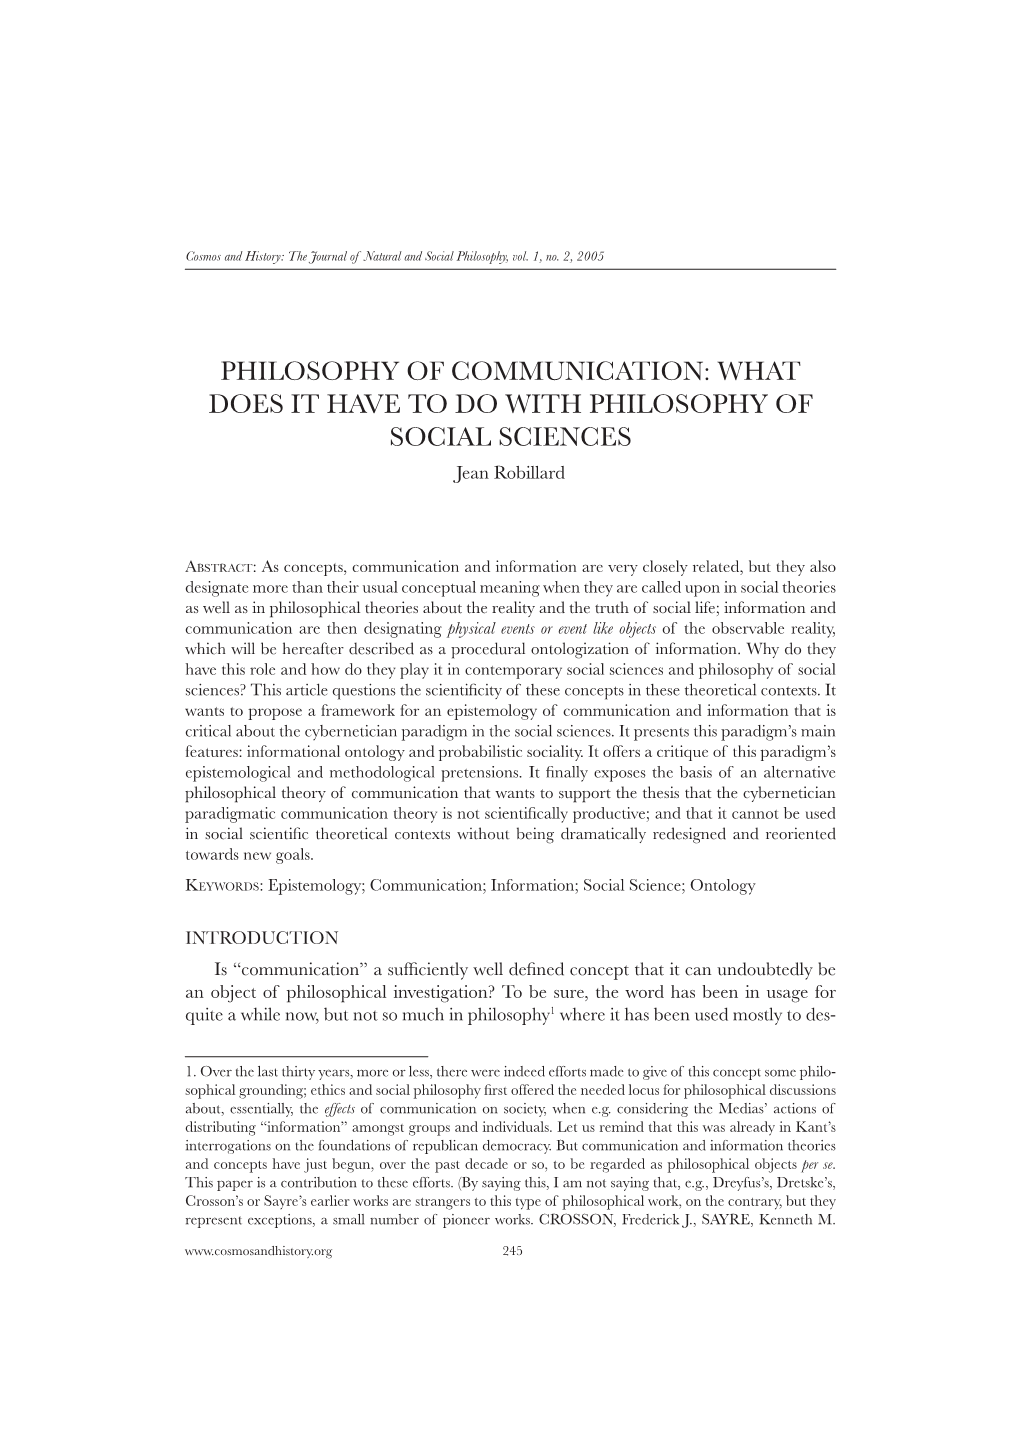 Philosophy of Communication: What Does It Have to Do with Philosophy of Social Sciences Jean Robillard